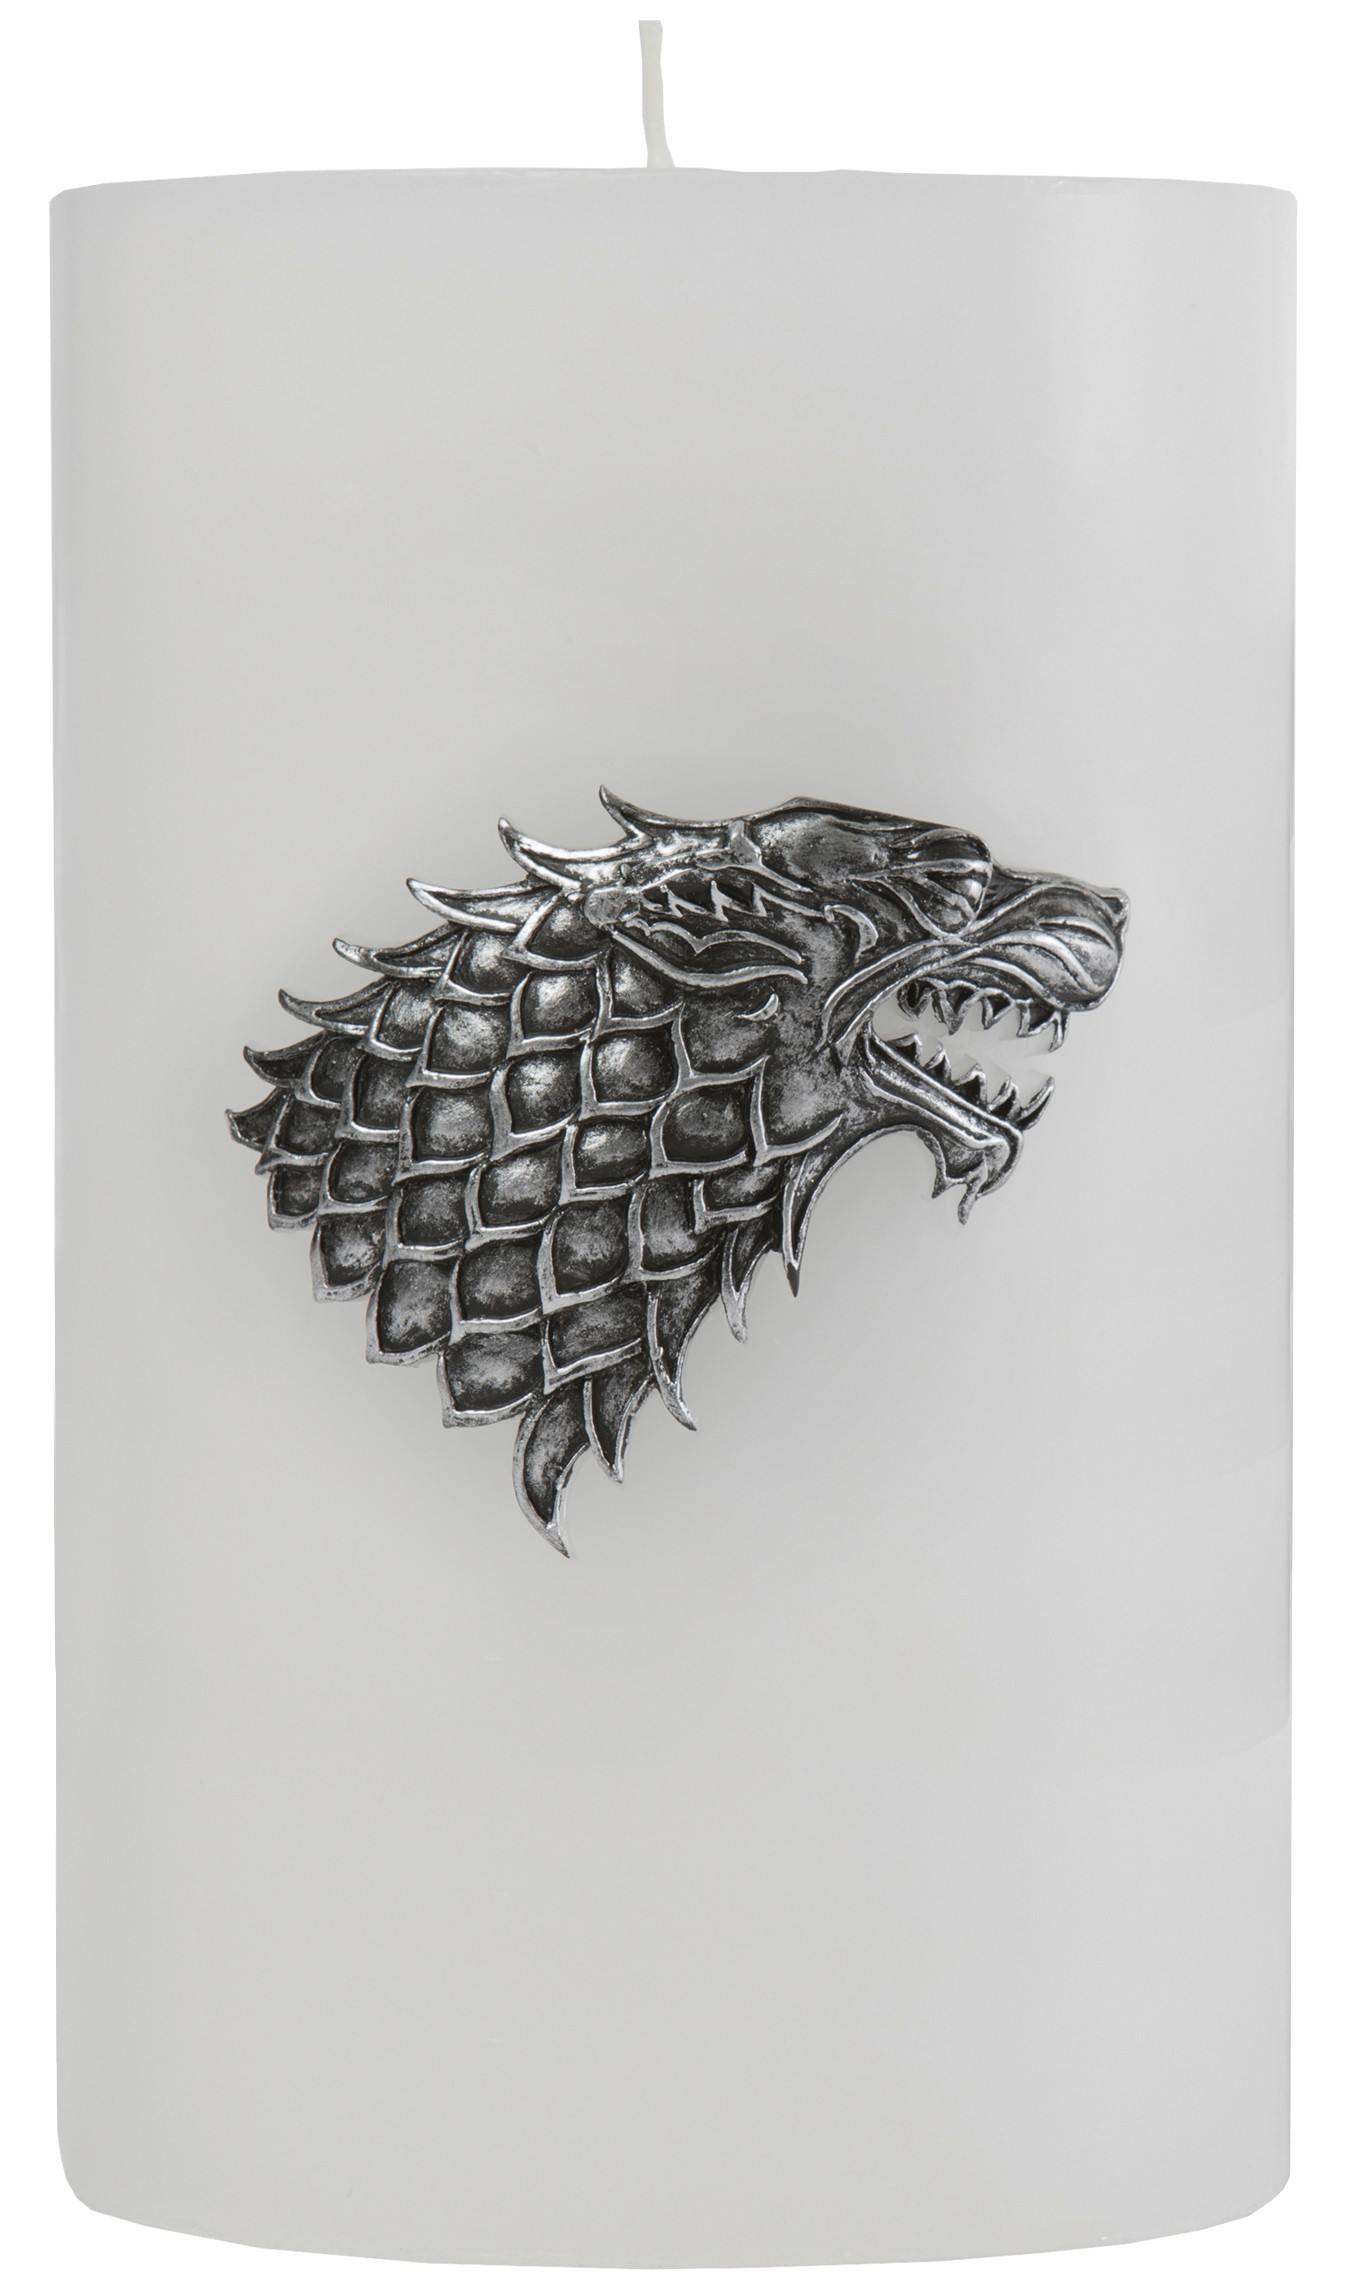 55435 Game of Thrones House Stark Large Sculpted Sigil Candle - Insight Editions - Titan Pop Culture